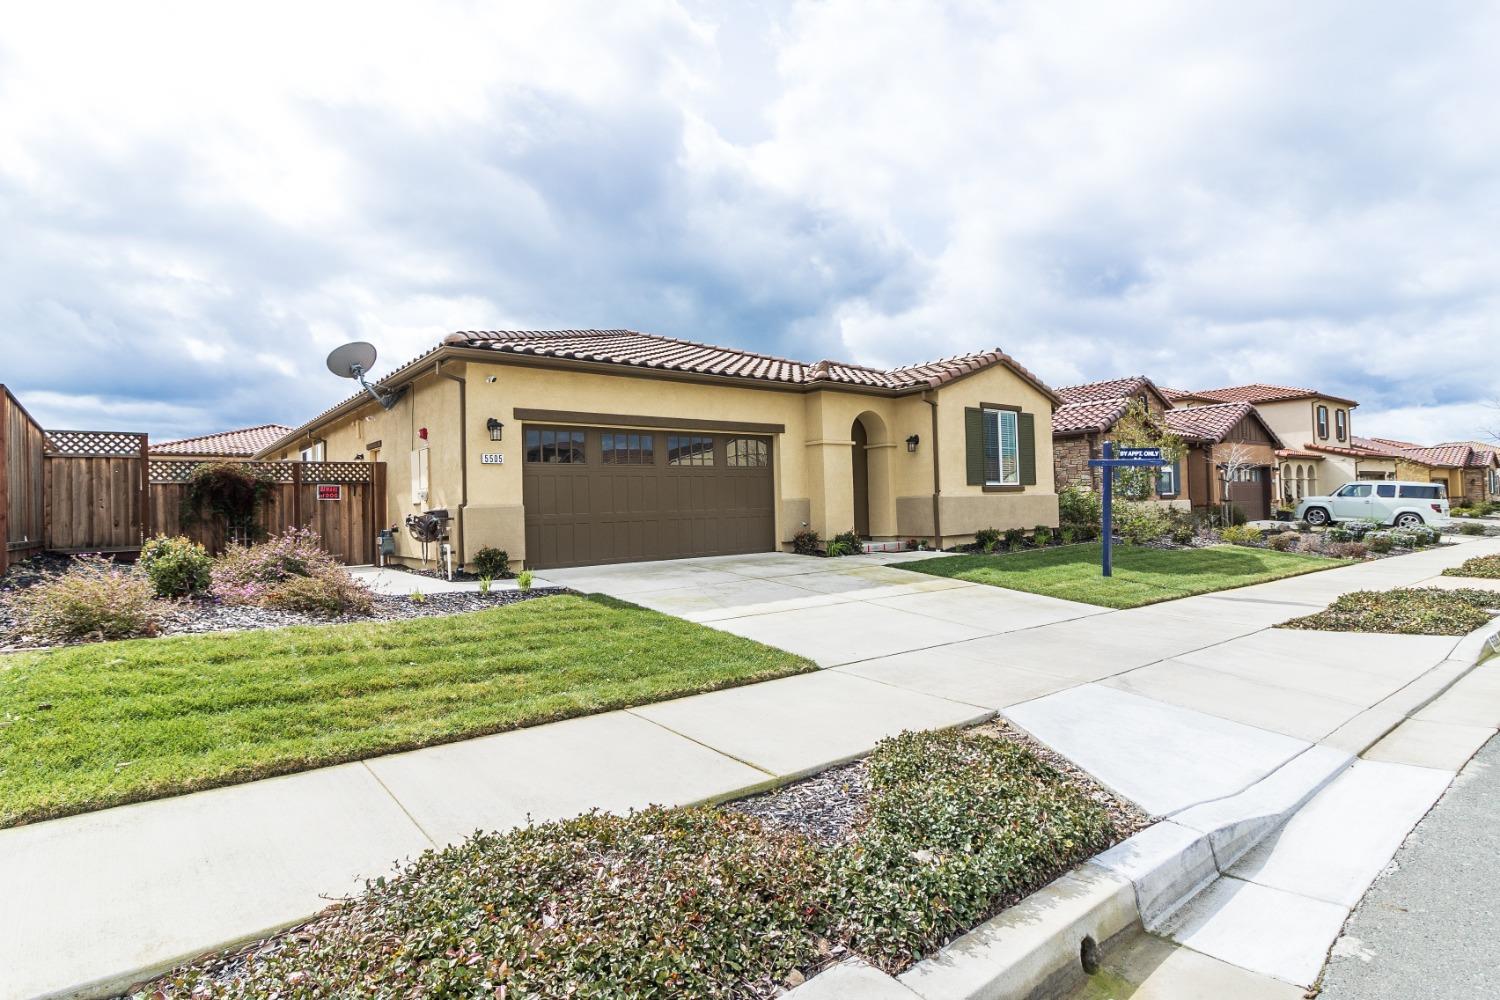 Photo of 5505 Pinnacle View Wy in Antioch, CA